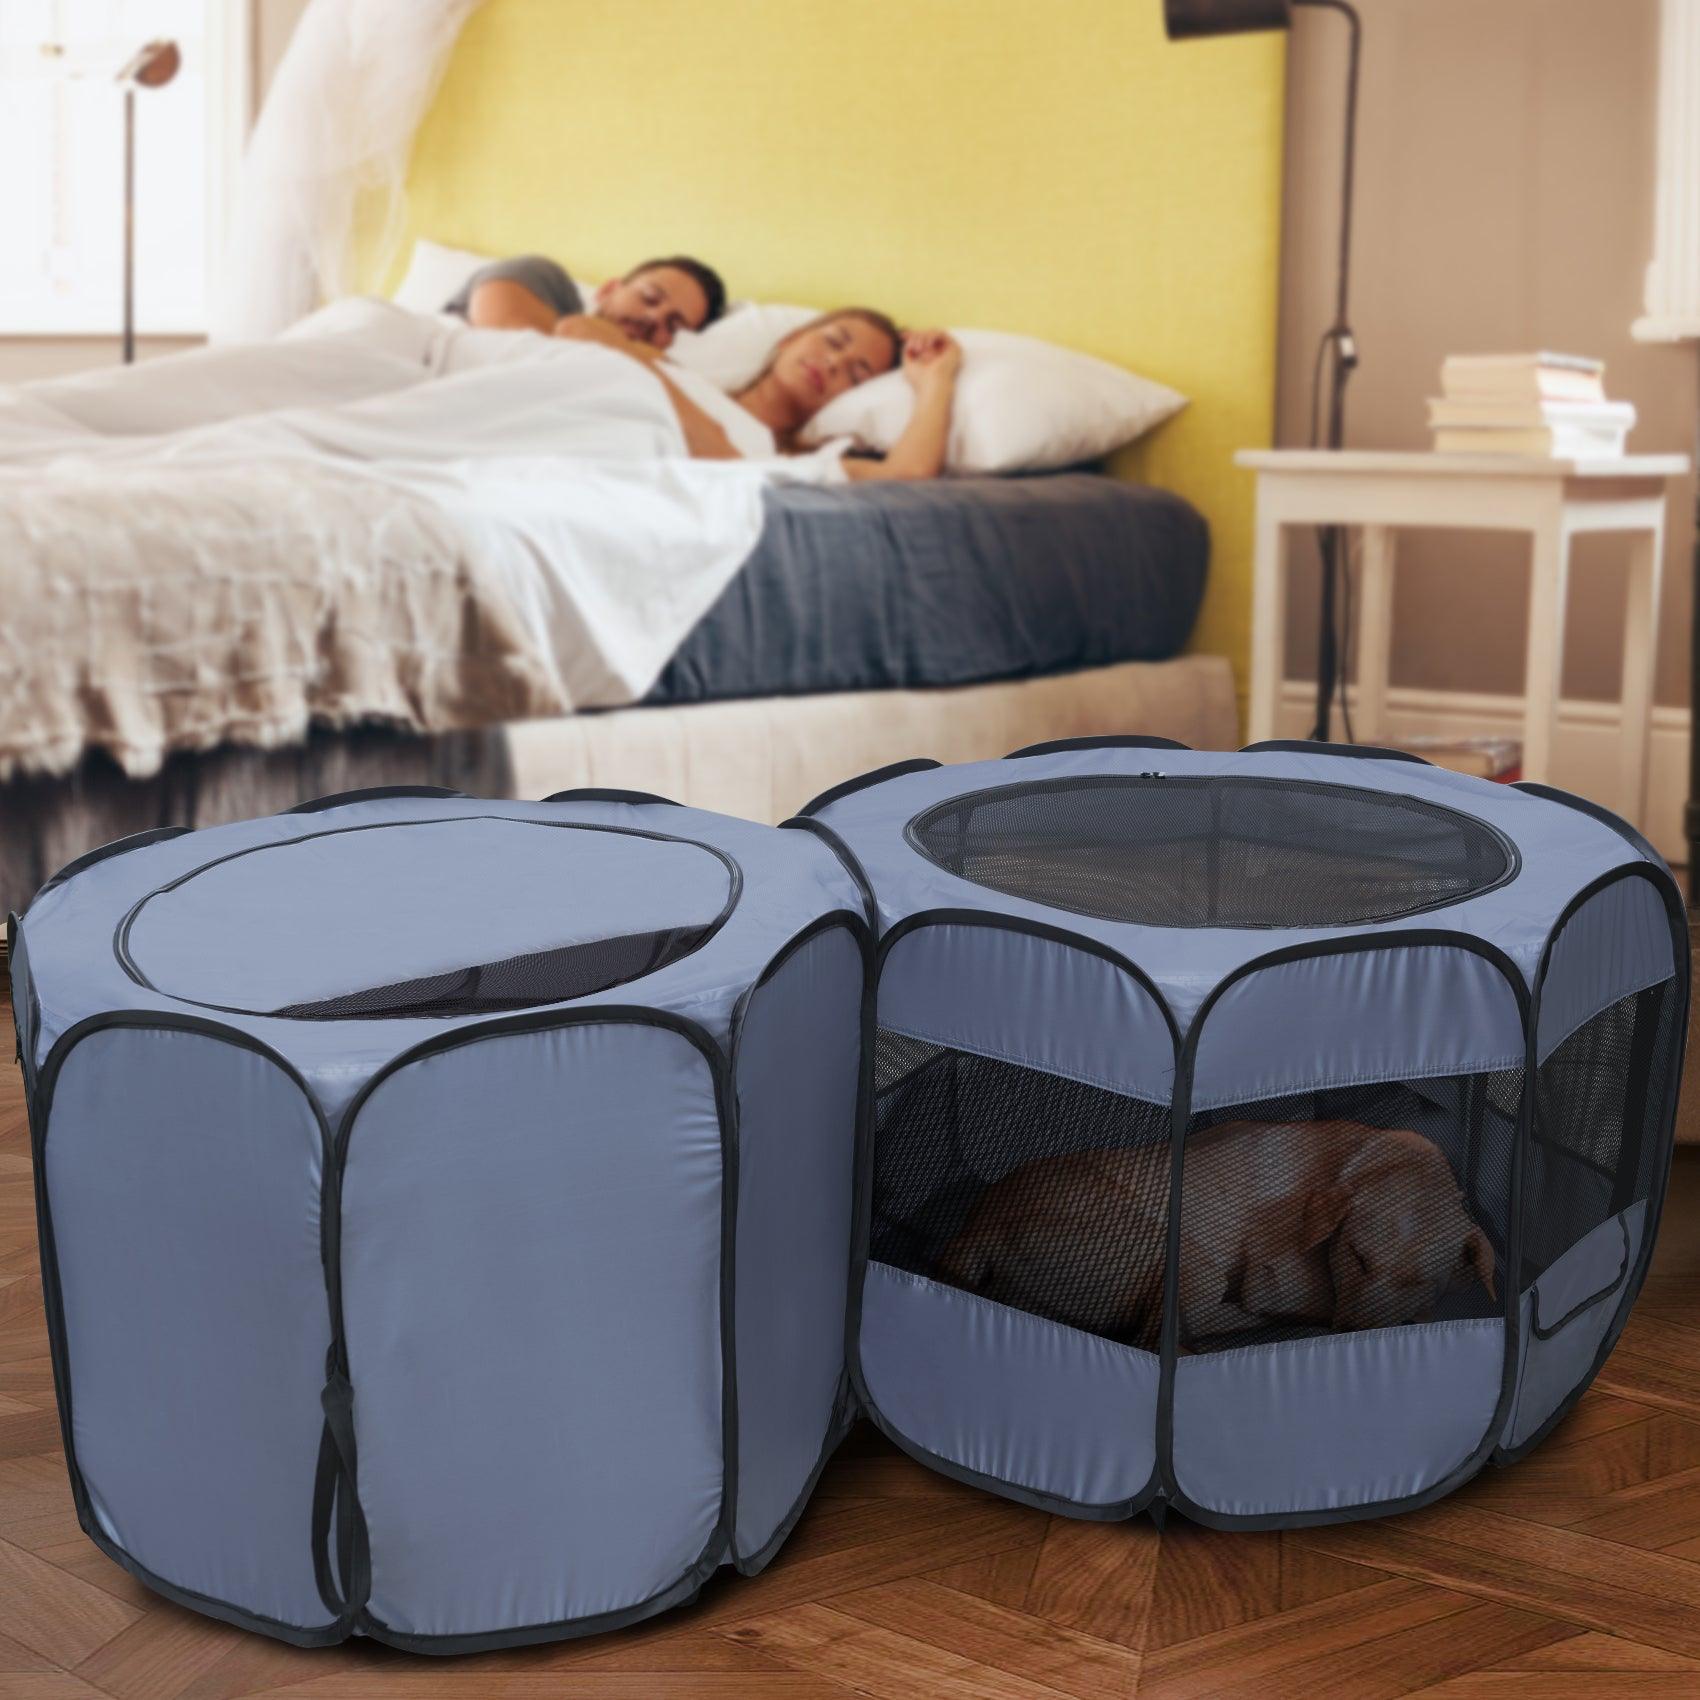 creates a quiet & comfortable sleeping area for your puppy in the bedroom by a pop up pet playpen